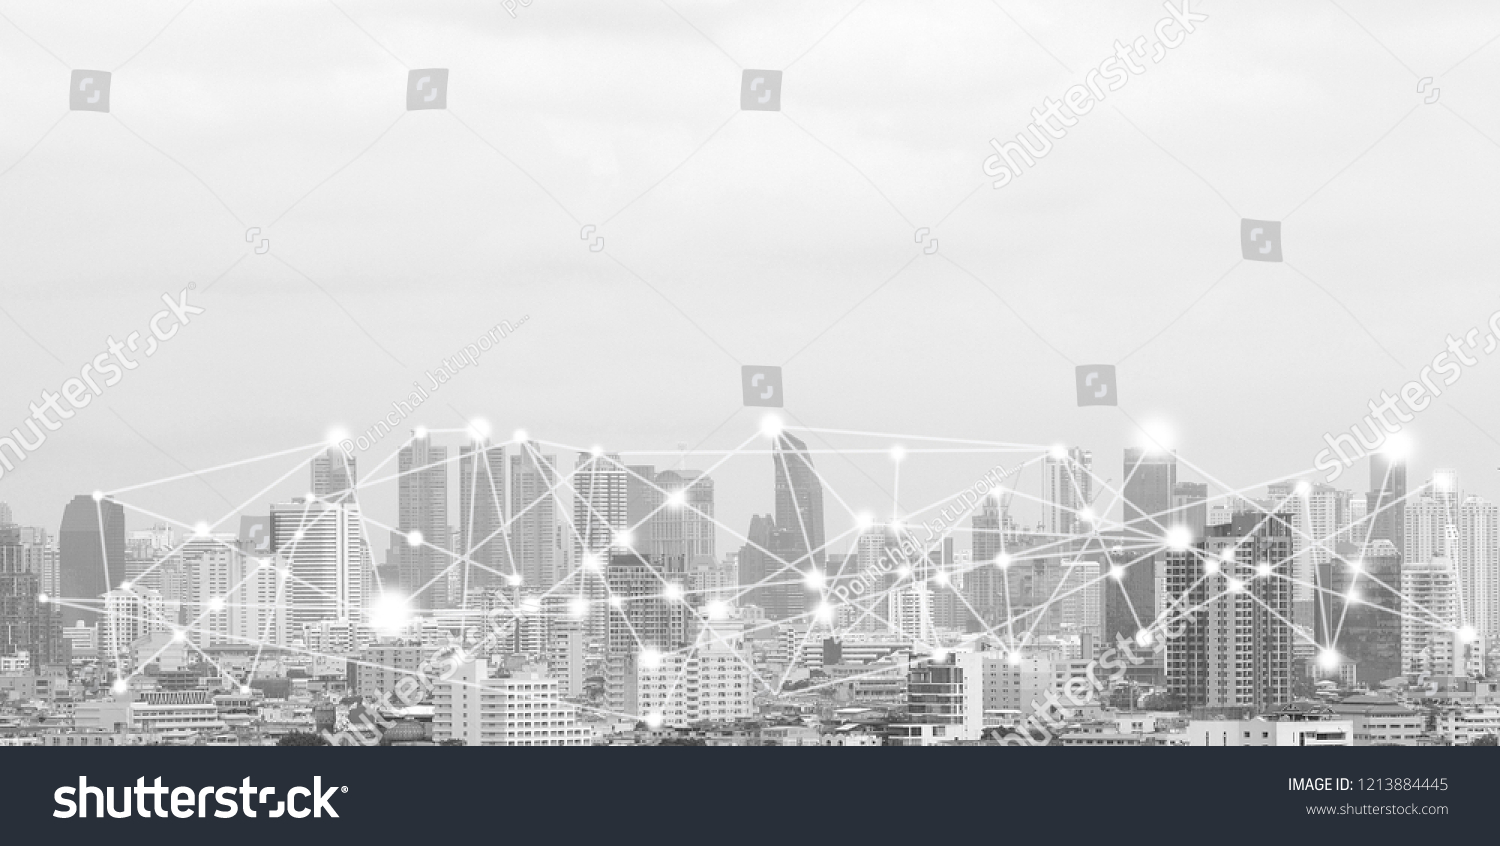 business connection in the city with digital graphic link network internet of things and information communication technology buildings black and white background #1213884445